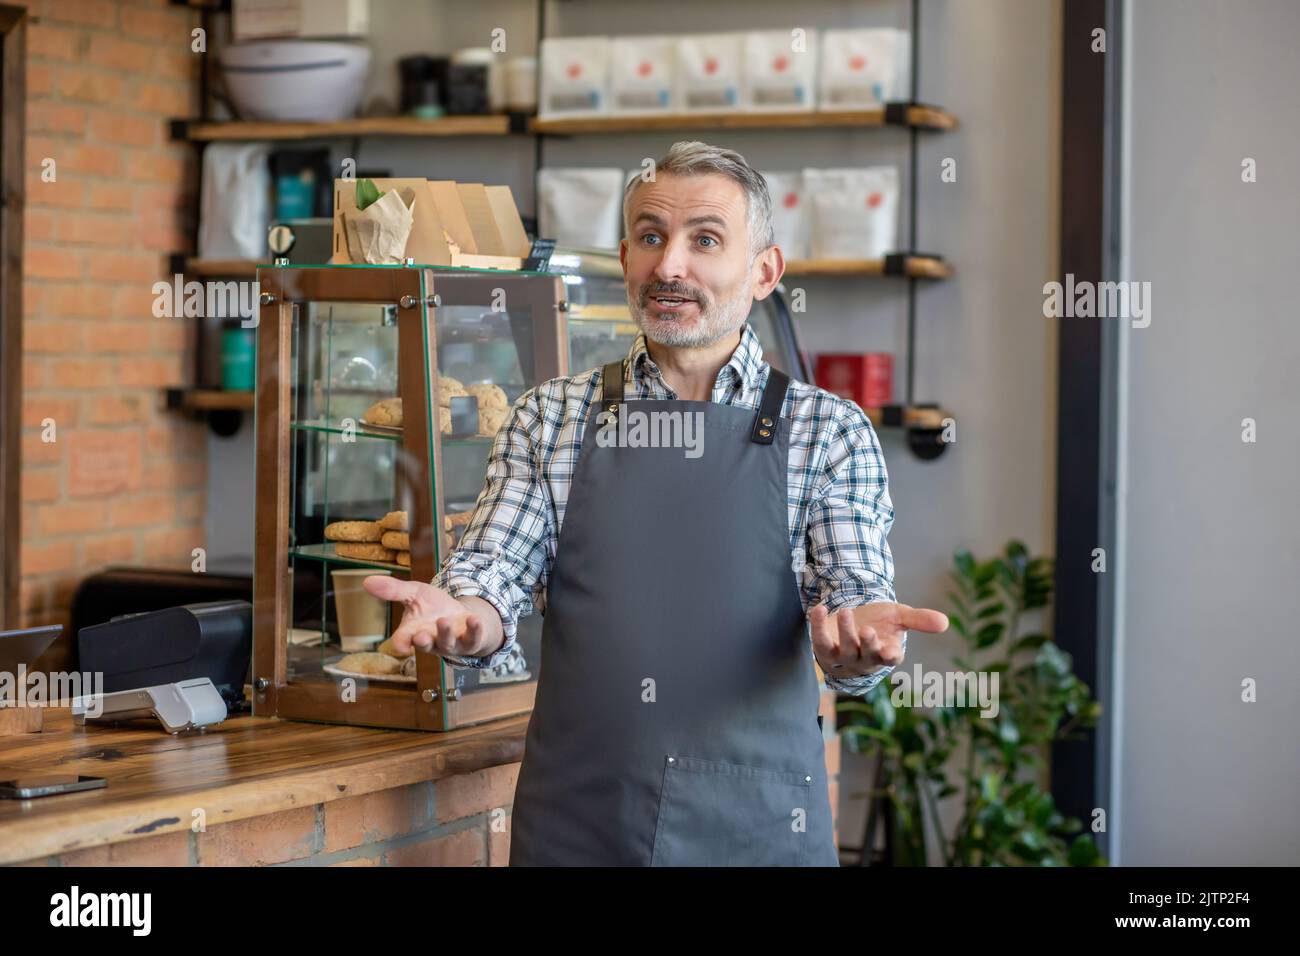 Cafe owner welcoming customers in his establishment Stock Photo